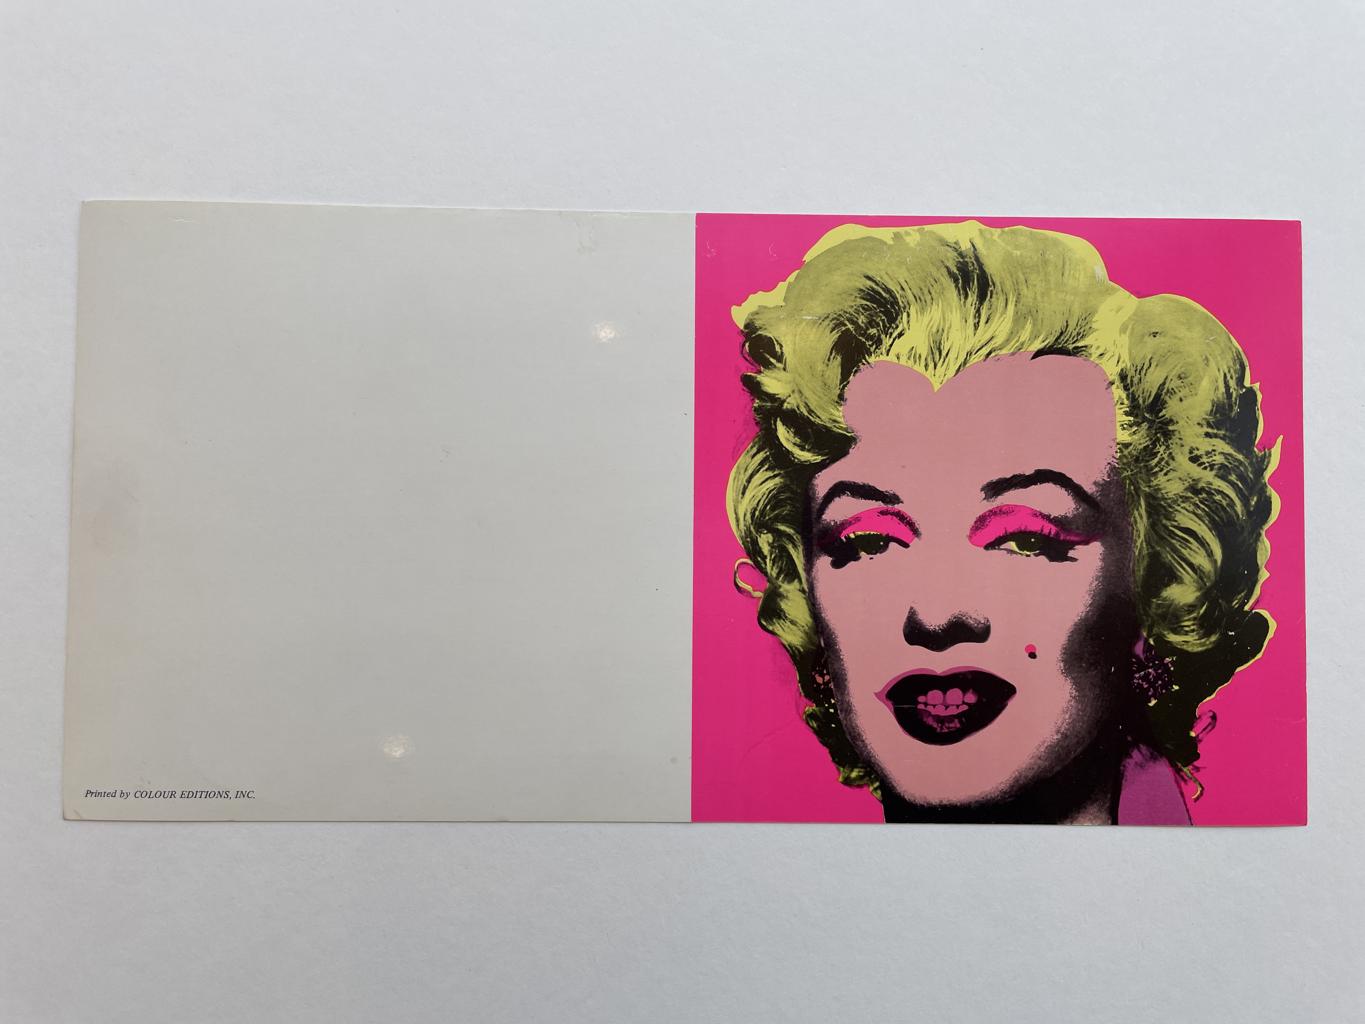 Andy Warhol, 'Marilyn (Announcement)', 1981 | Available for Sale | Image of full invitation